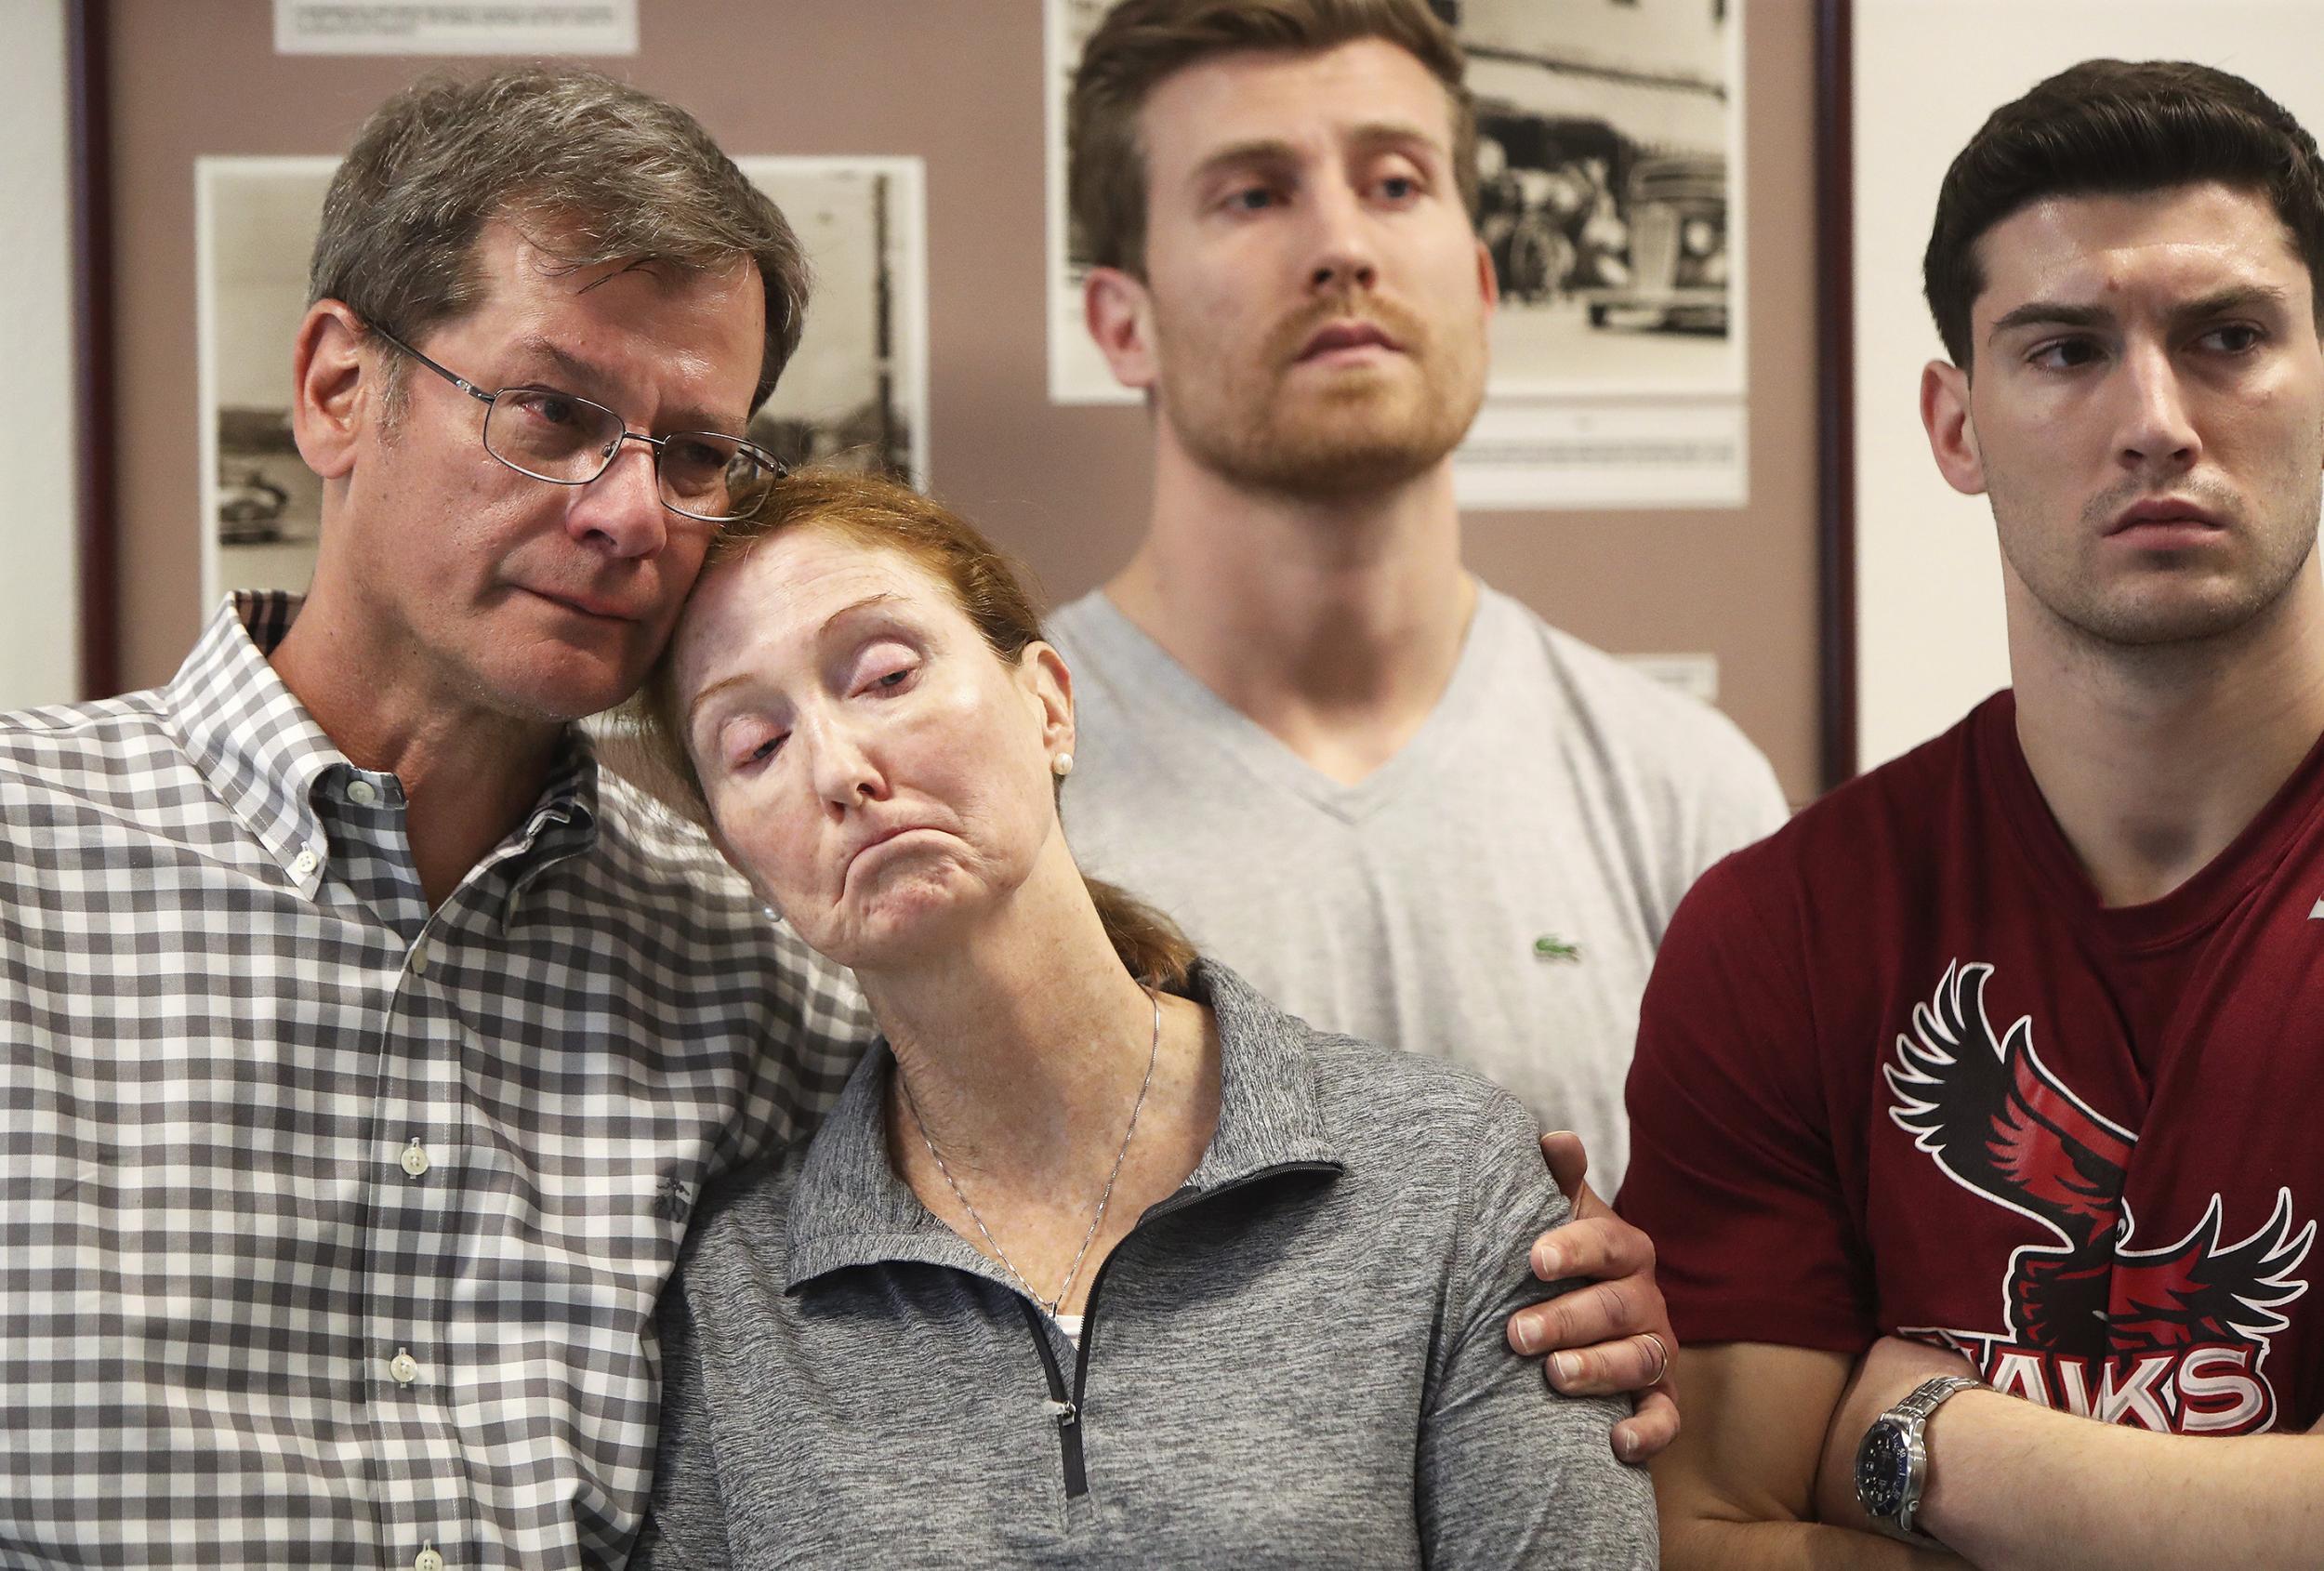 Parents John and Lisa Dombroski, left, stand with their sons John, behind, and Kevin during a press conference regarding their son and brother Mark